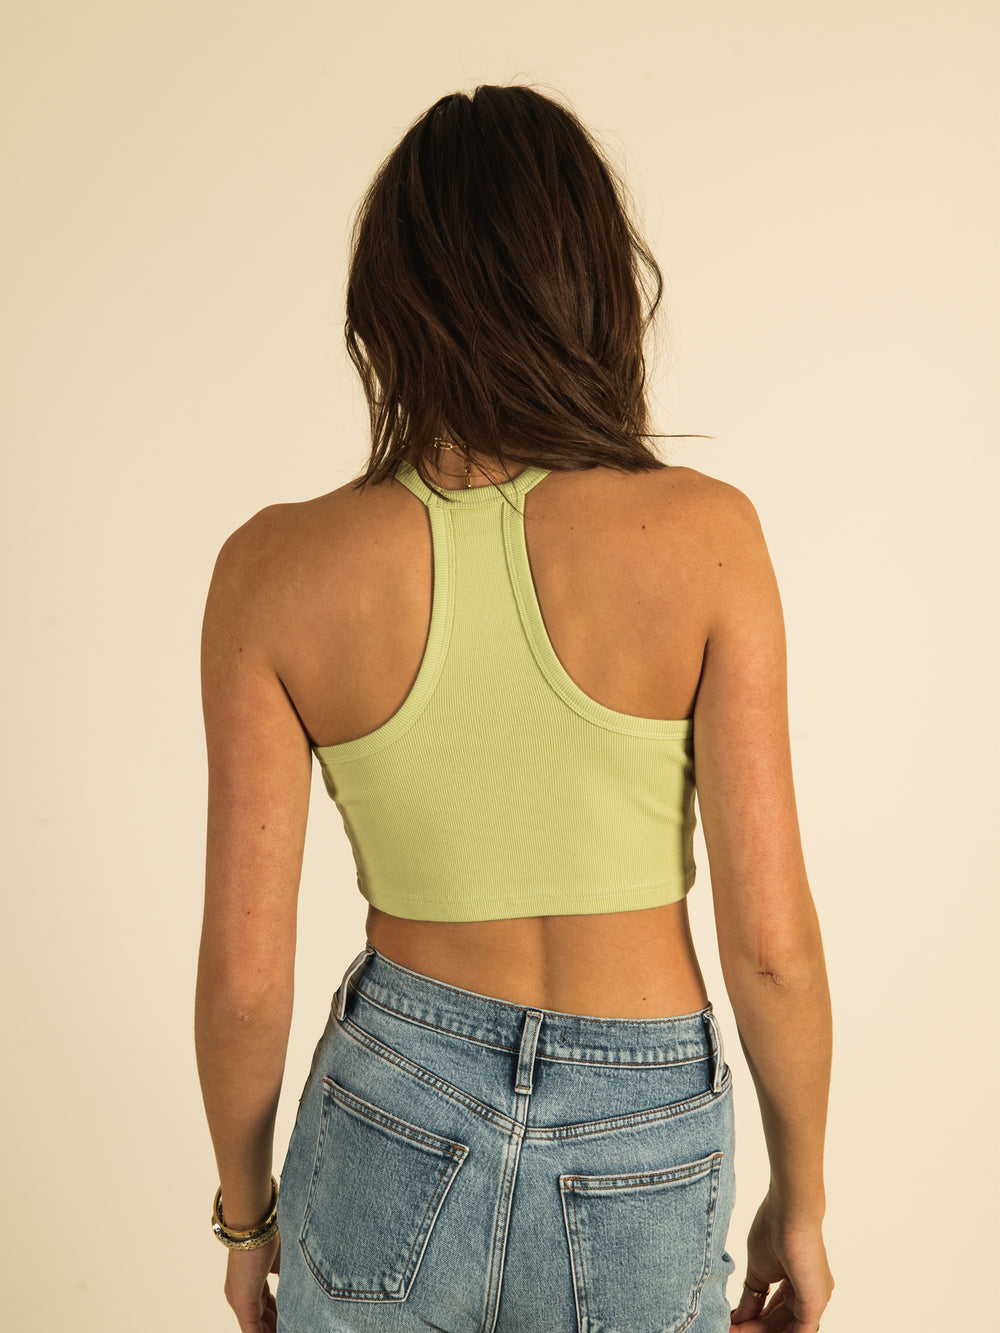 HARLOW HIGH NECK RACERBACK TANK TOP  - CLEARANCE